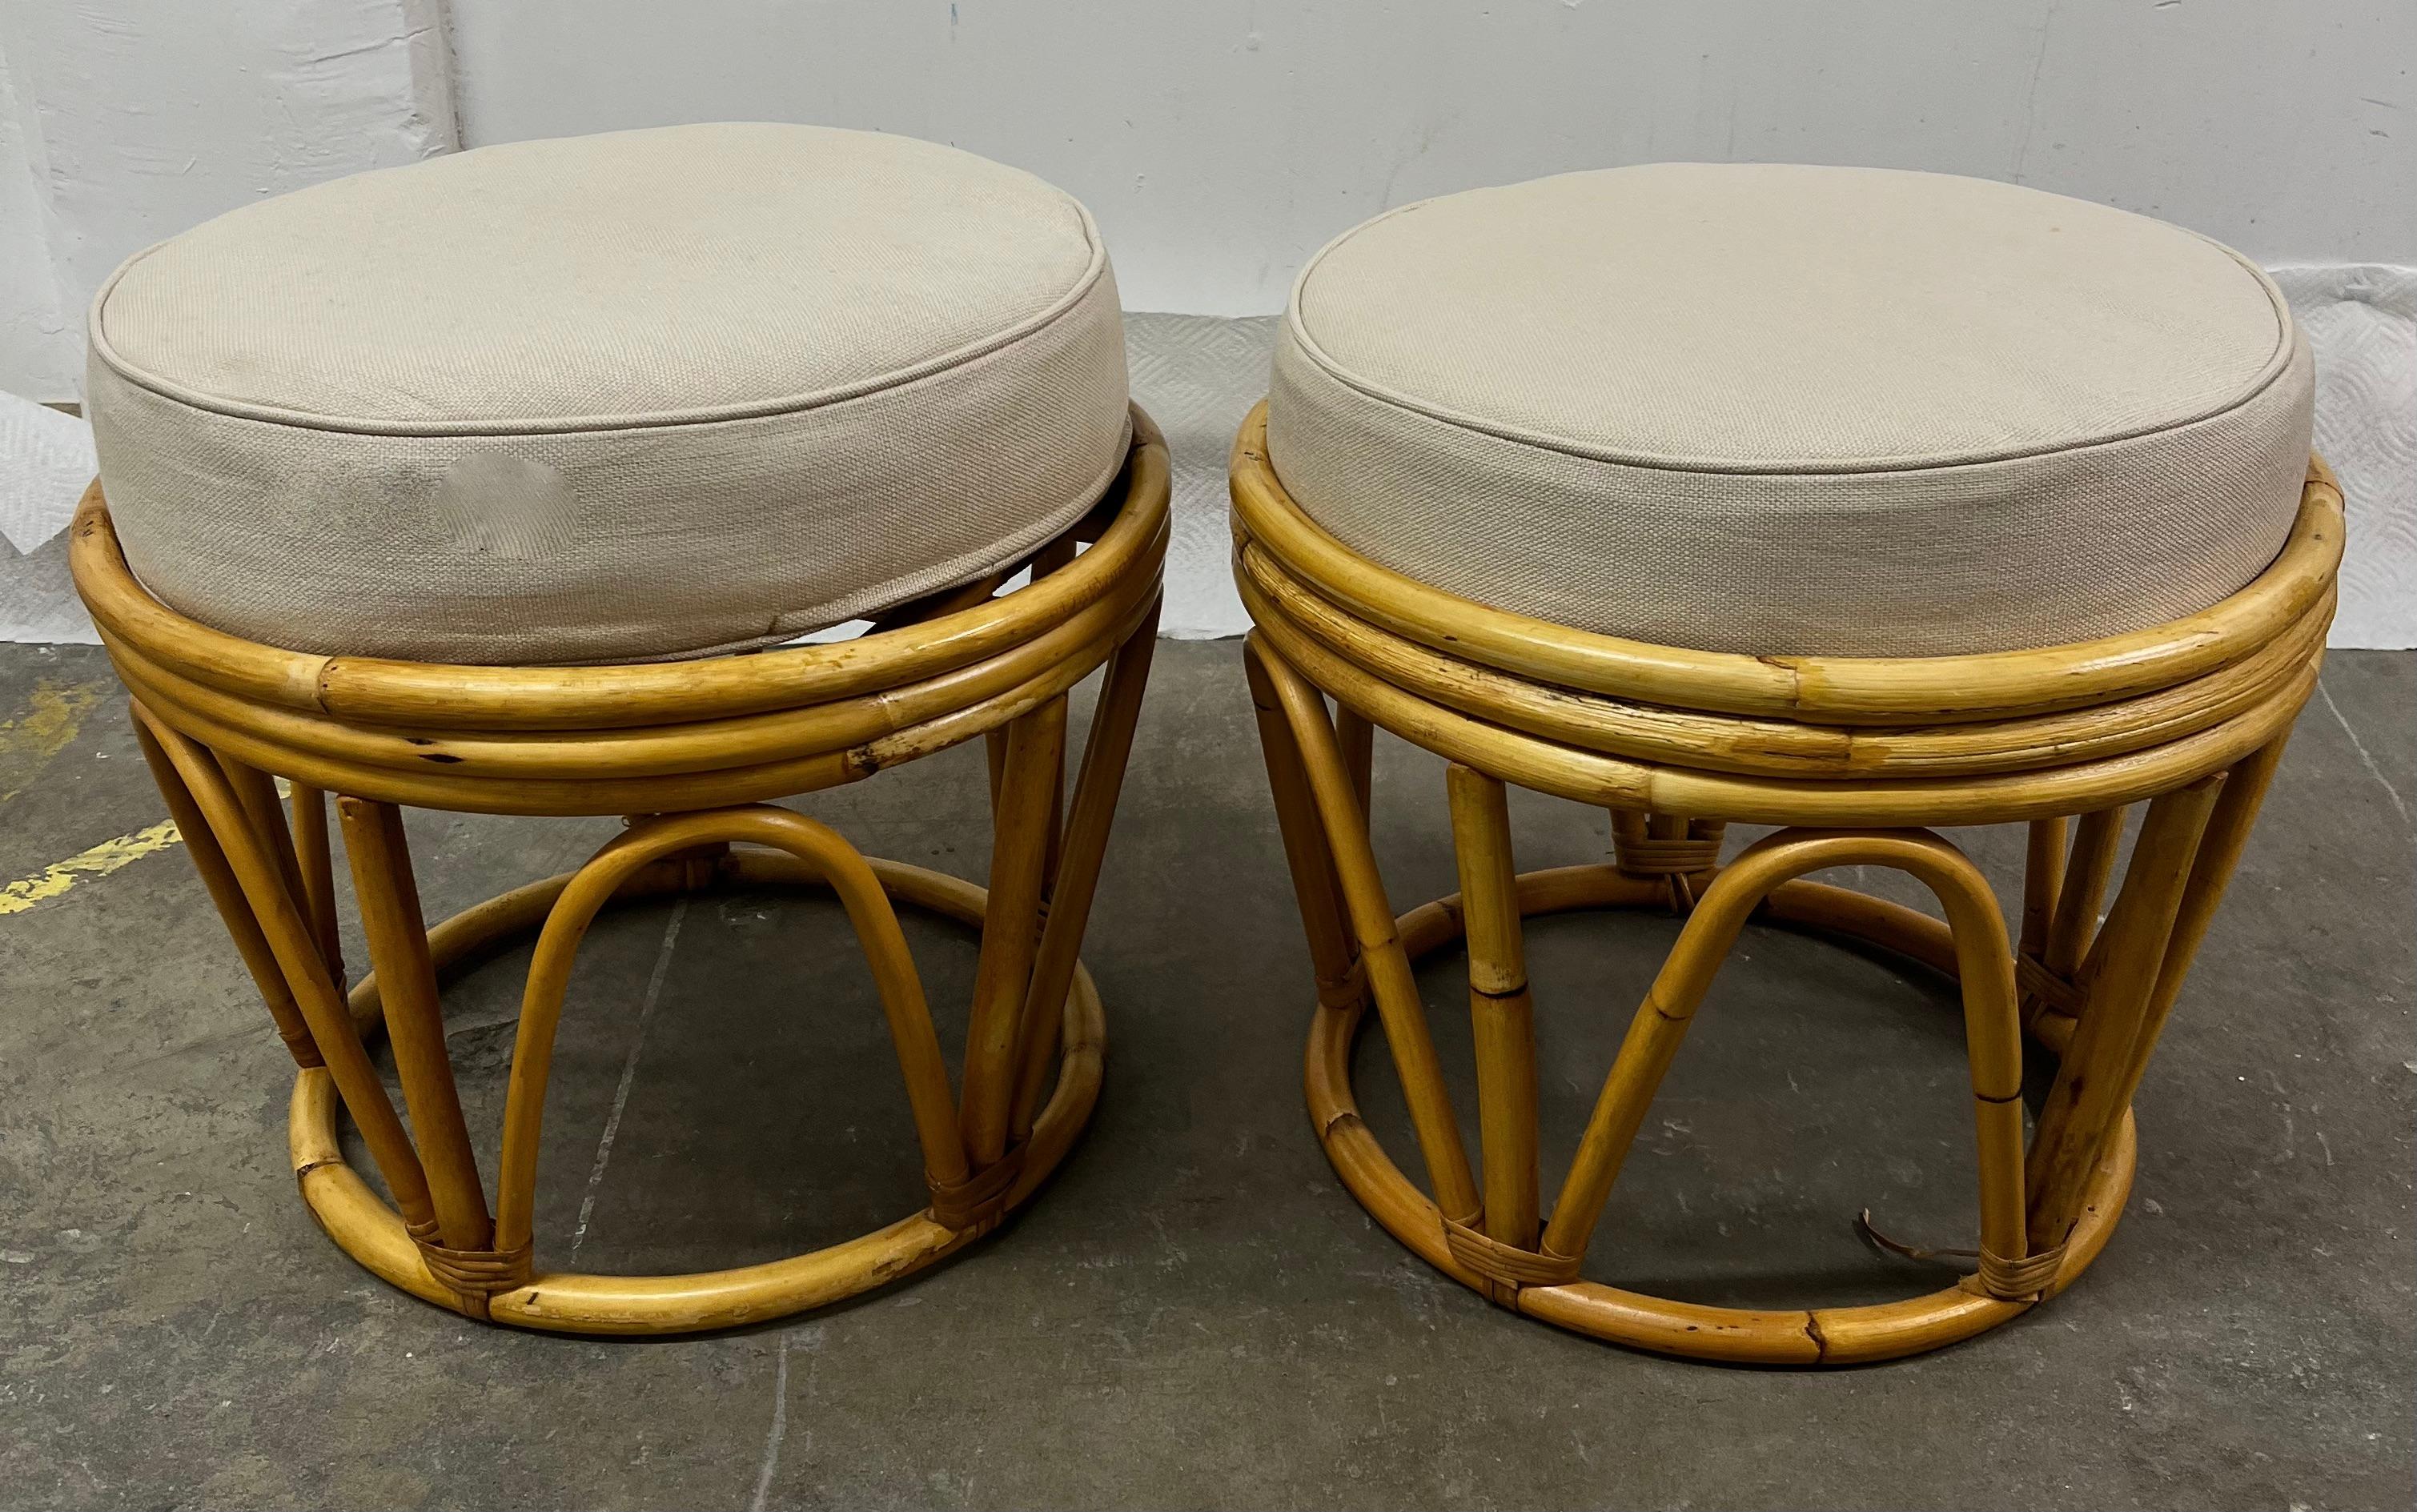 A lovely pair of Rattan stools or ottomans. The pair, with a piece of glass, stone or wood, could also be utilized as side tables.

A very hot look right now - rattan is a perfect compliment to any relaxed, ethnic or garden setting, from the